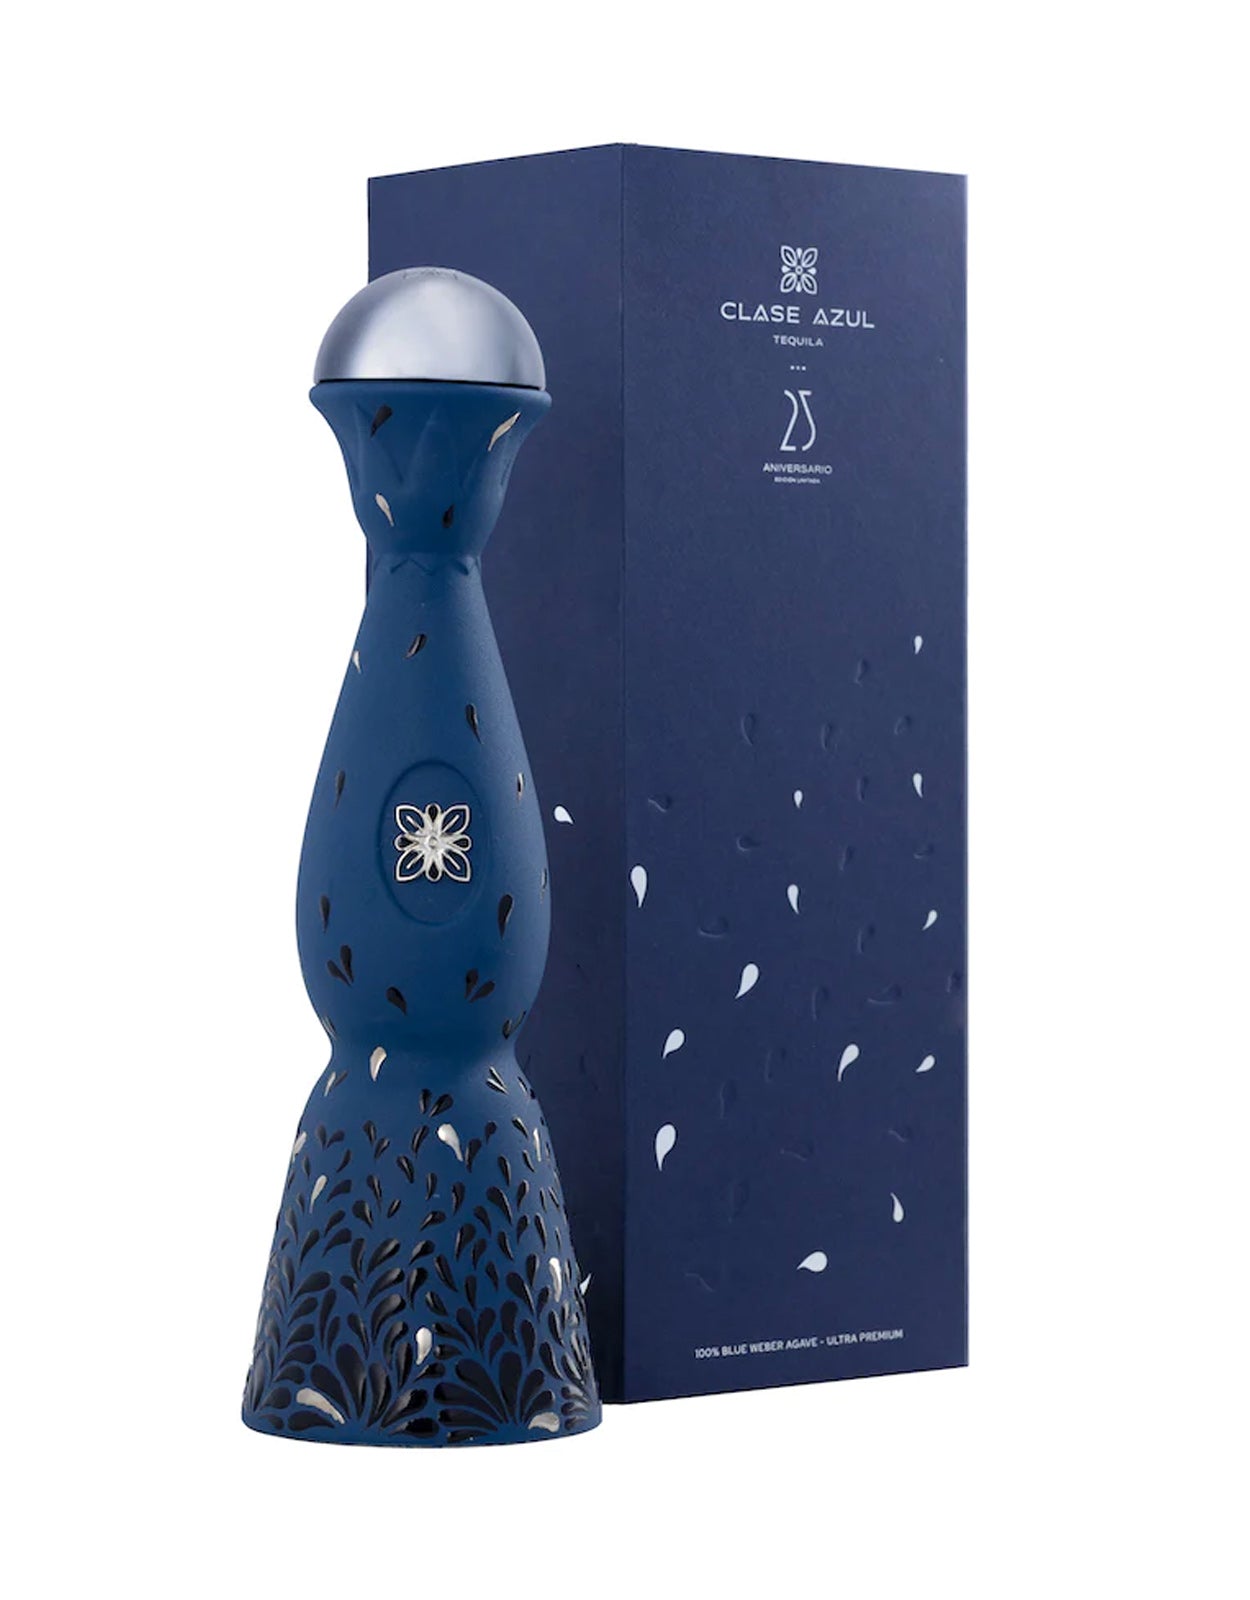 Clase Azul 25th Anniversary Tequila - 1 Litre Bottle